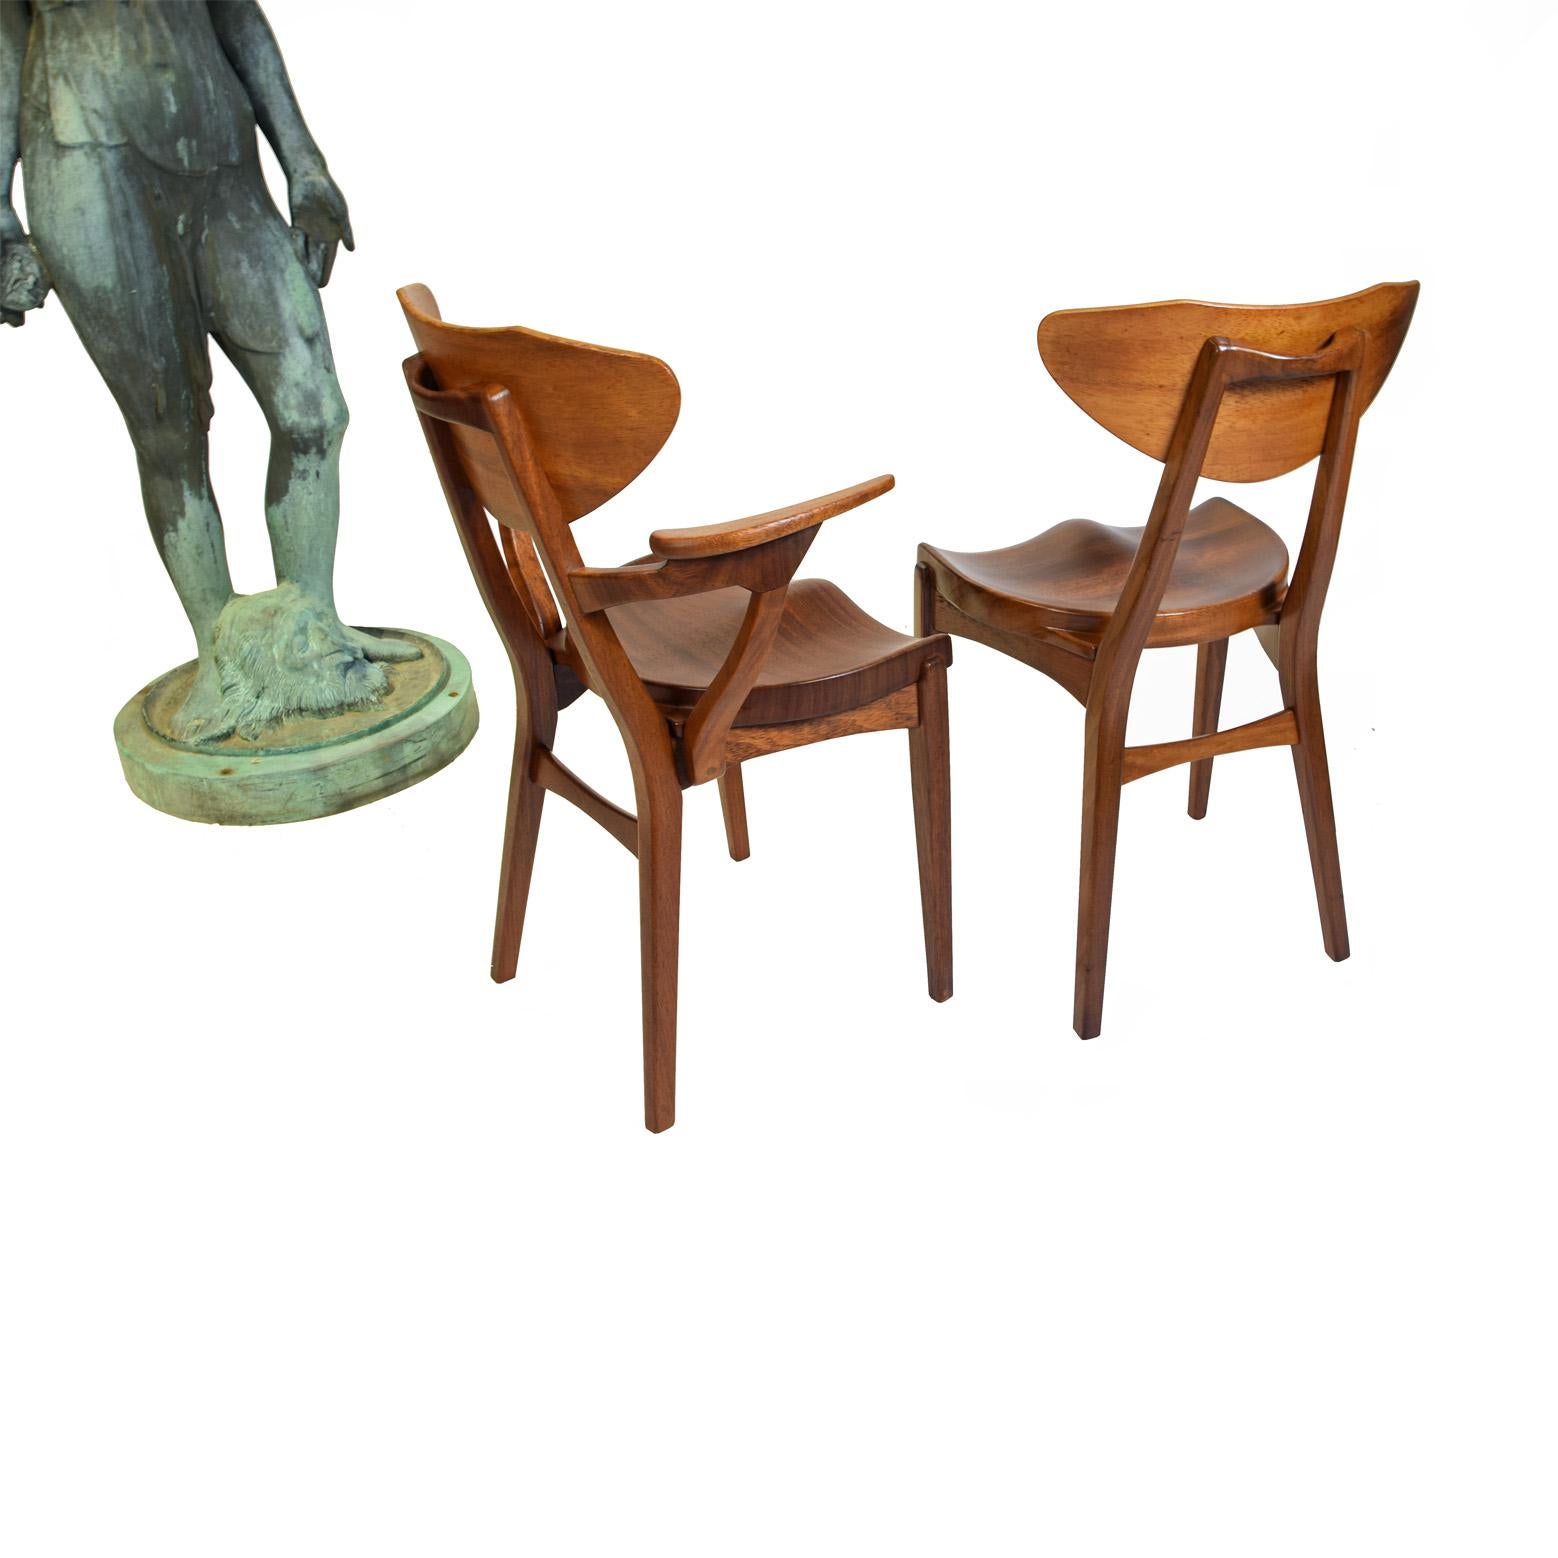 Mid-20th Century Set of 14 Solid Teak Dining Chairs by Richard Jensen & Kjærulff Rasmussen 1950's For Sale